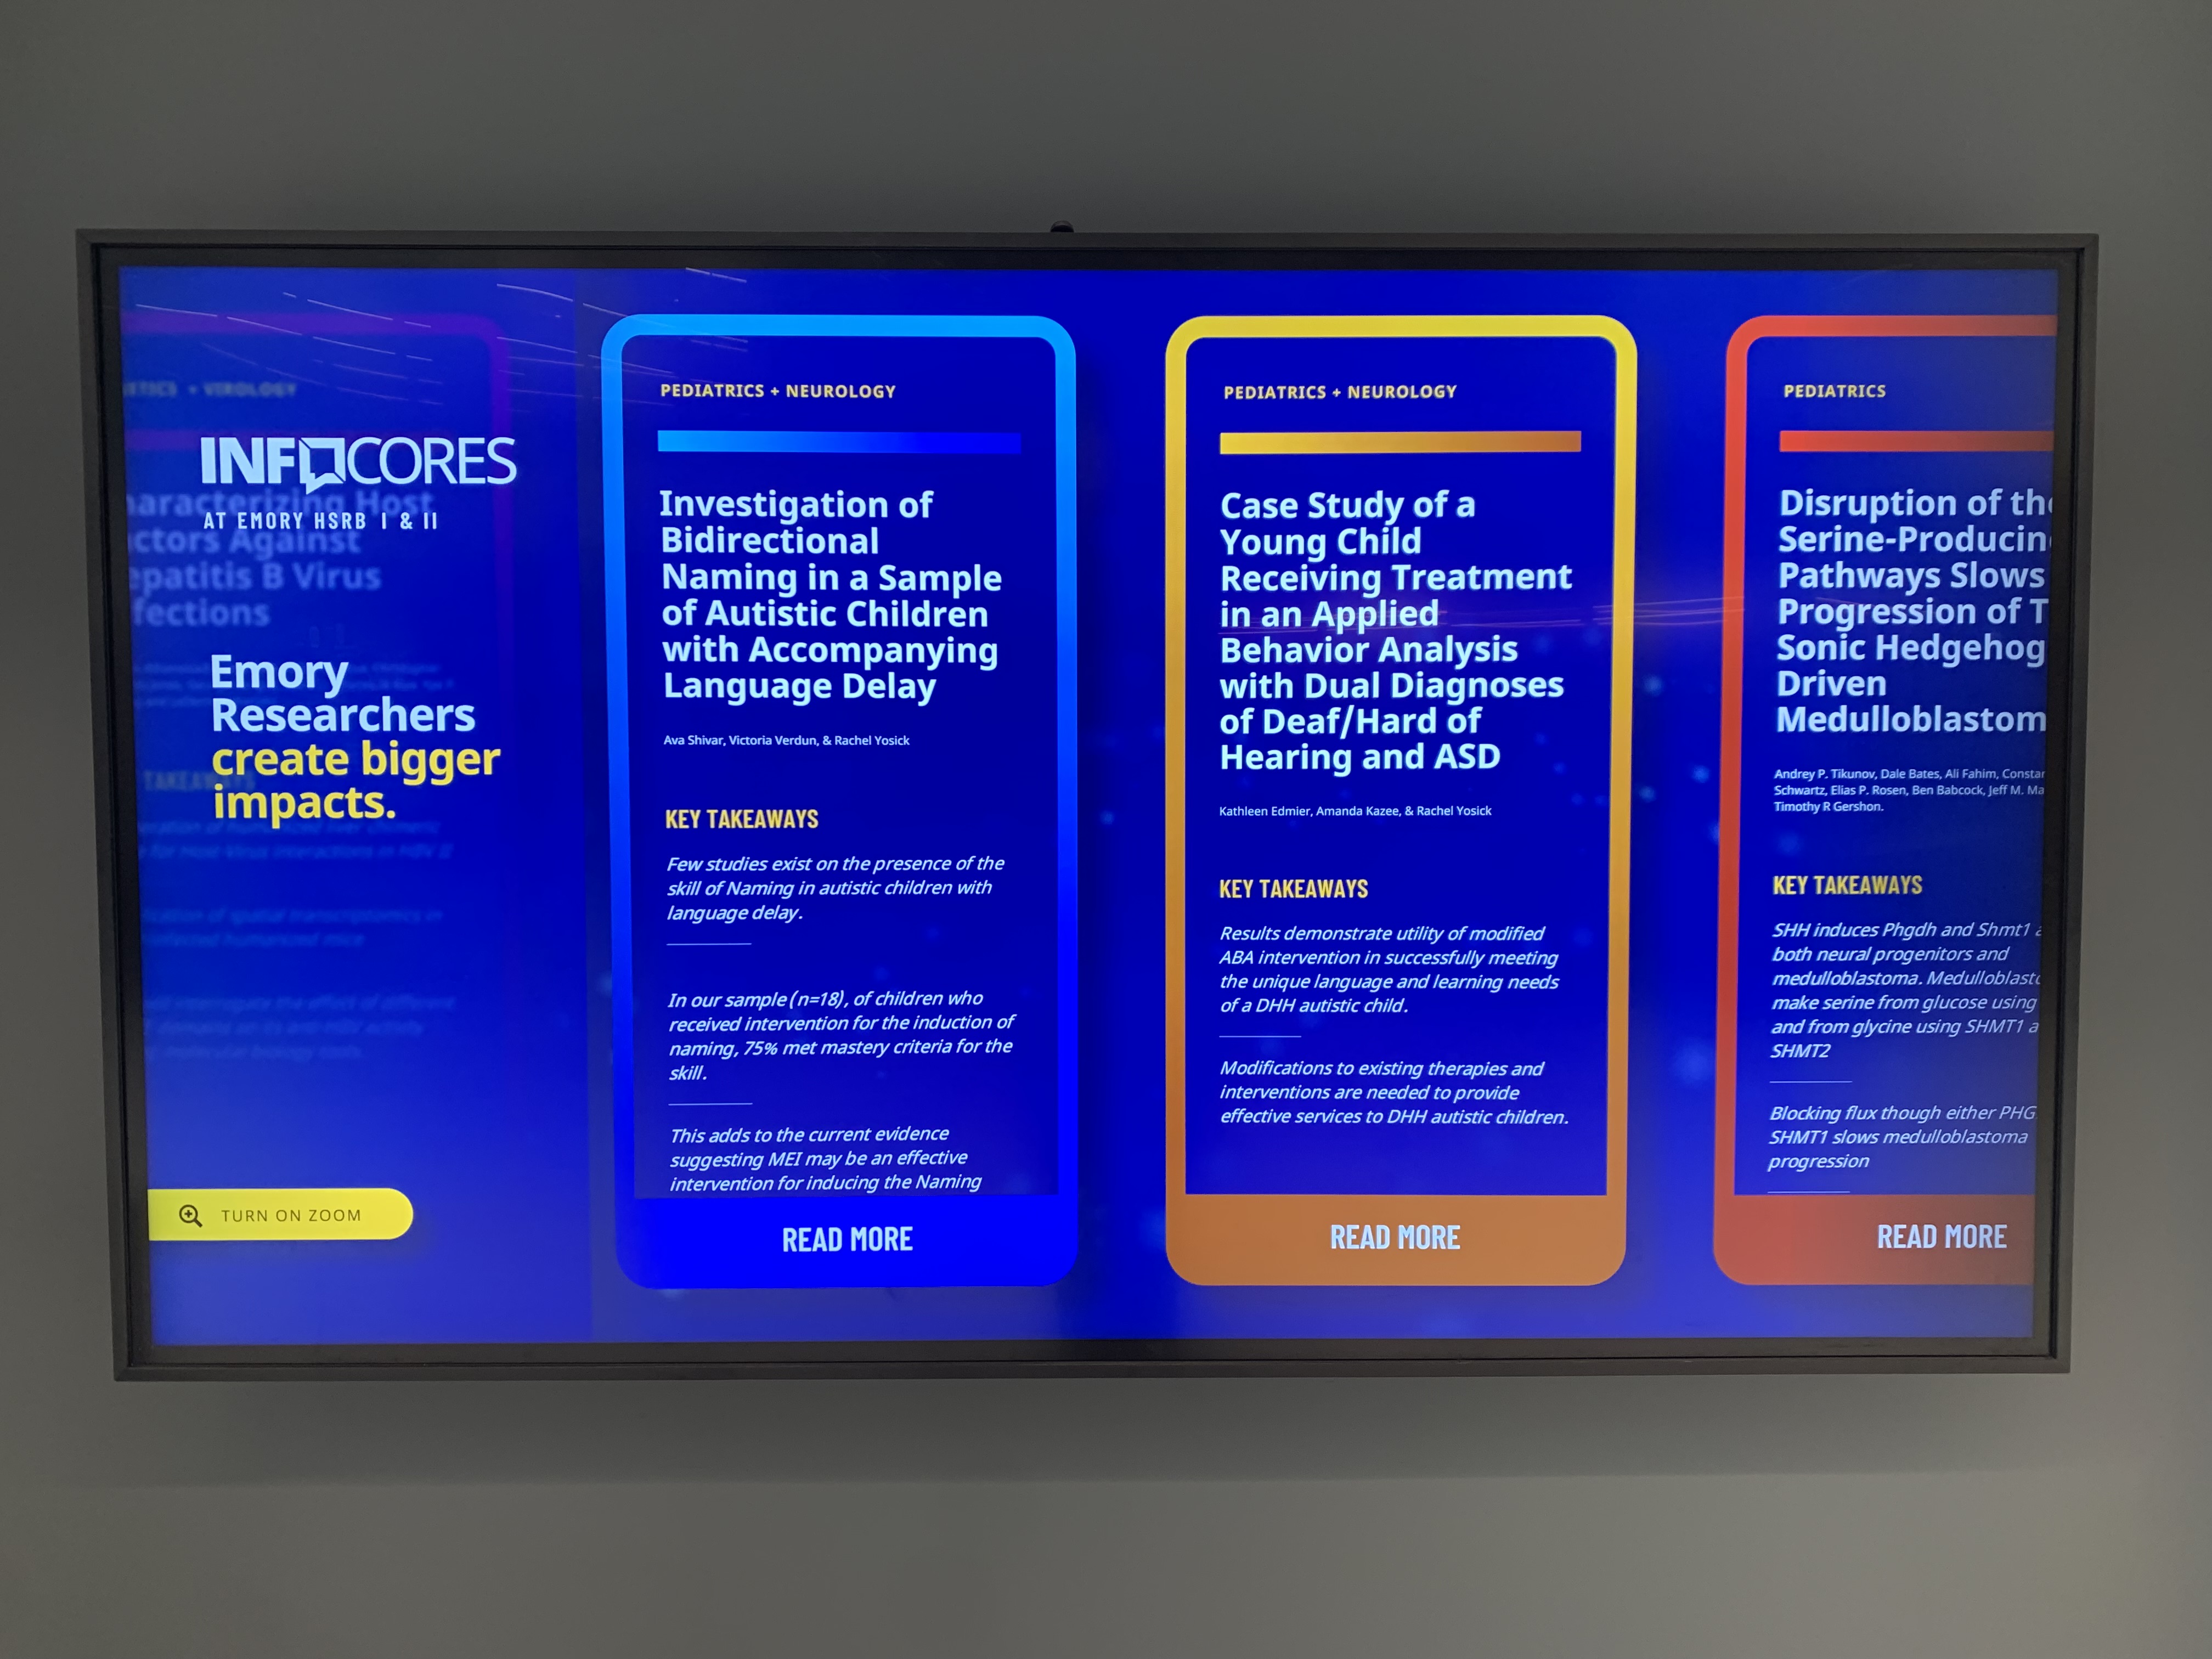 Info Cores allow for a more interactive experience than traditional research posters.  